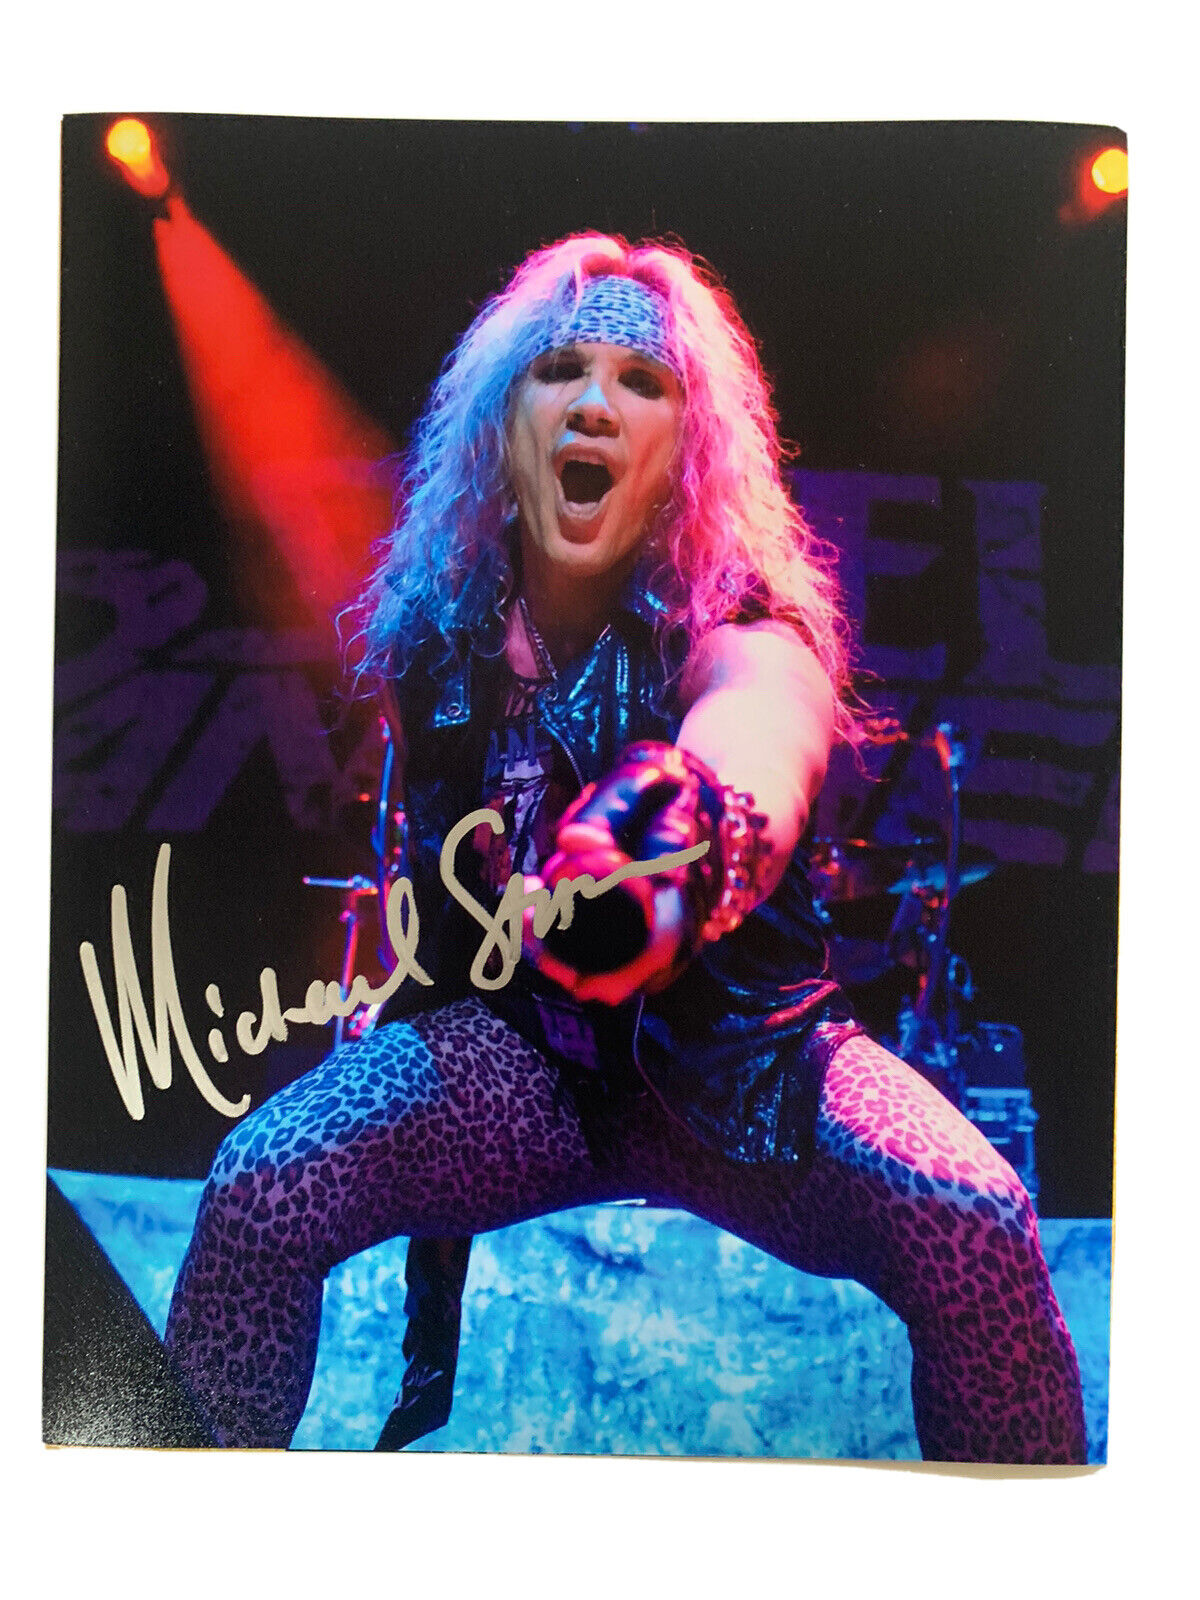 Steel Panther Michael Starr Autographed Signed Auto. 8x10 Photo Poster painting PSA Guaranteed 3